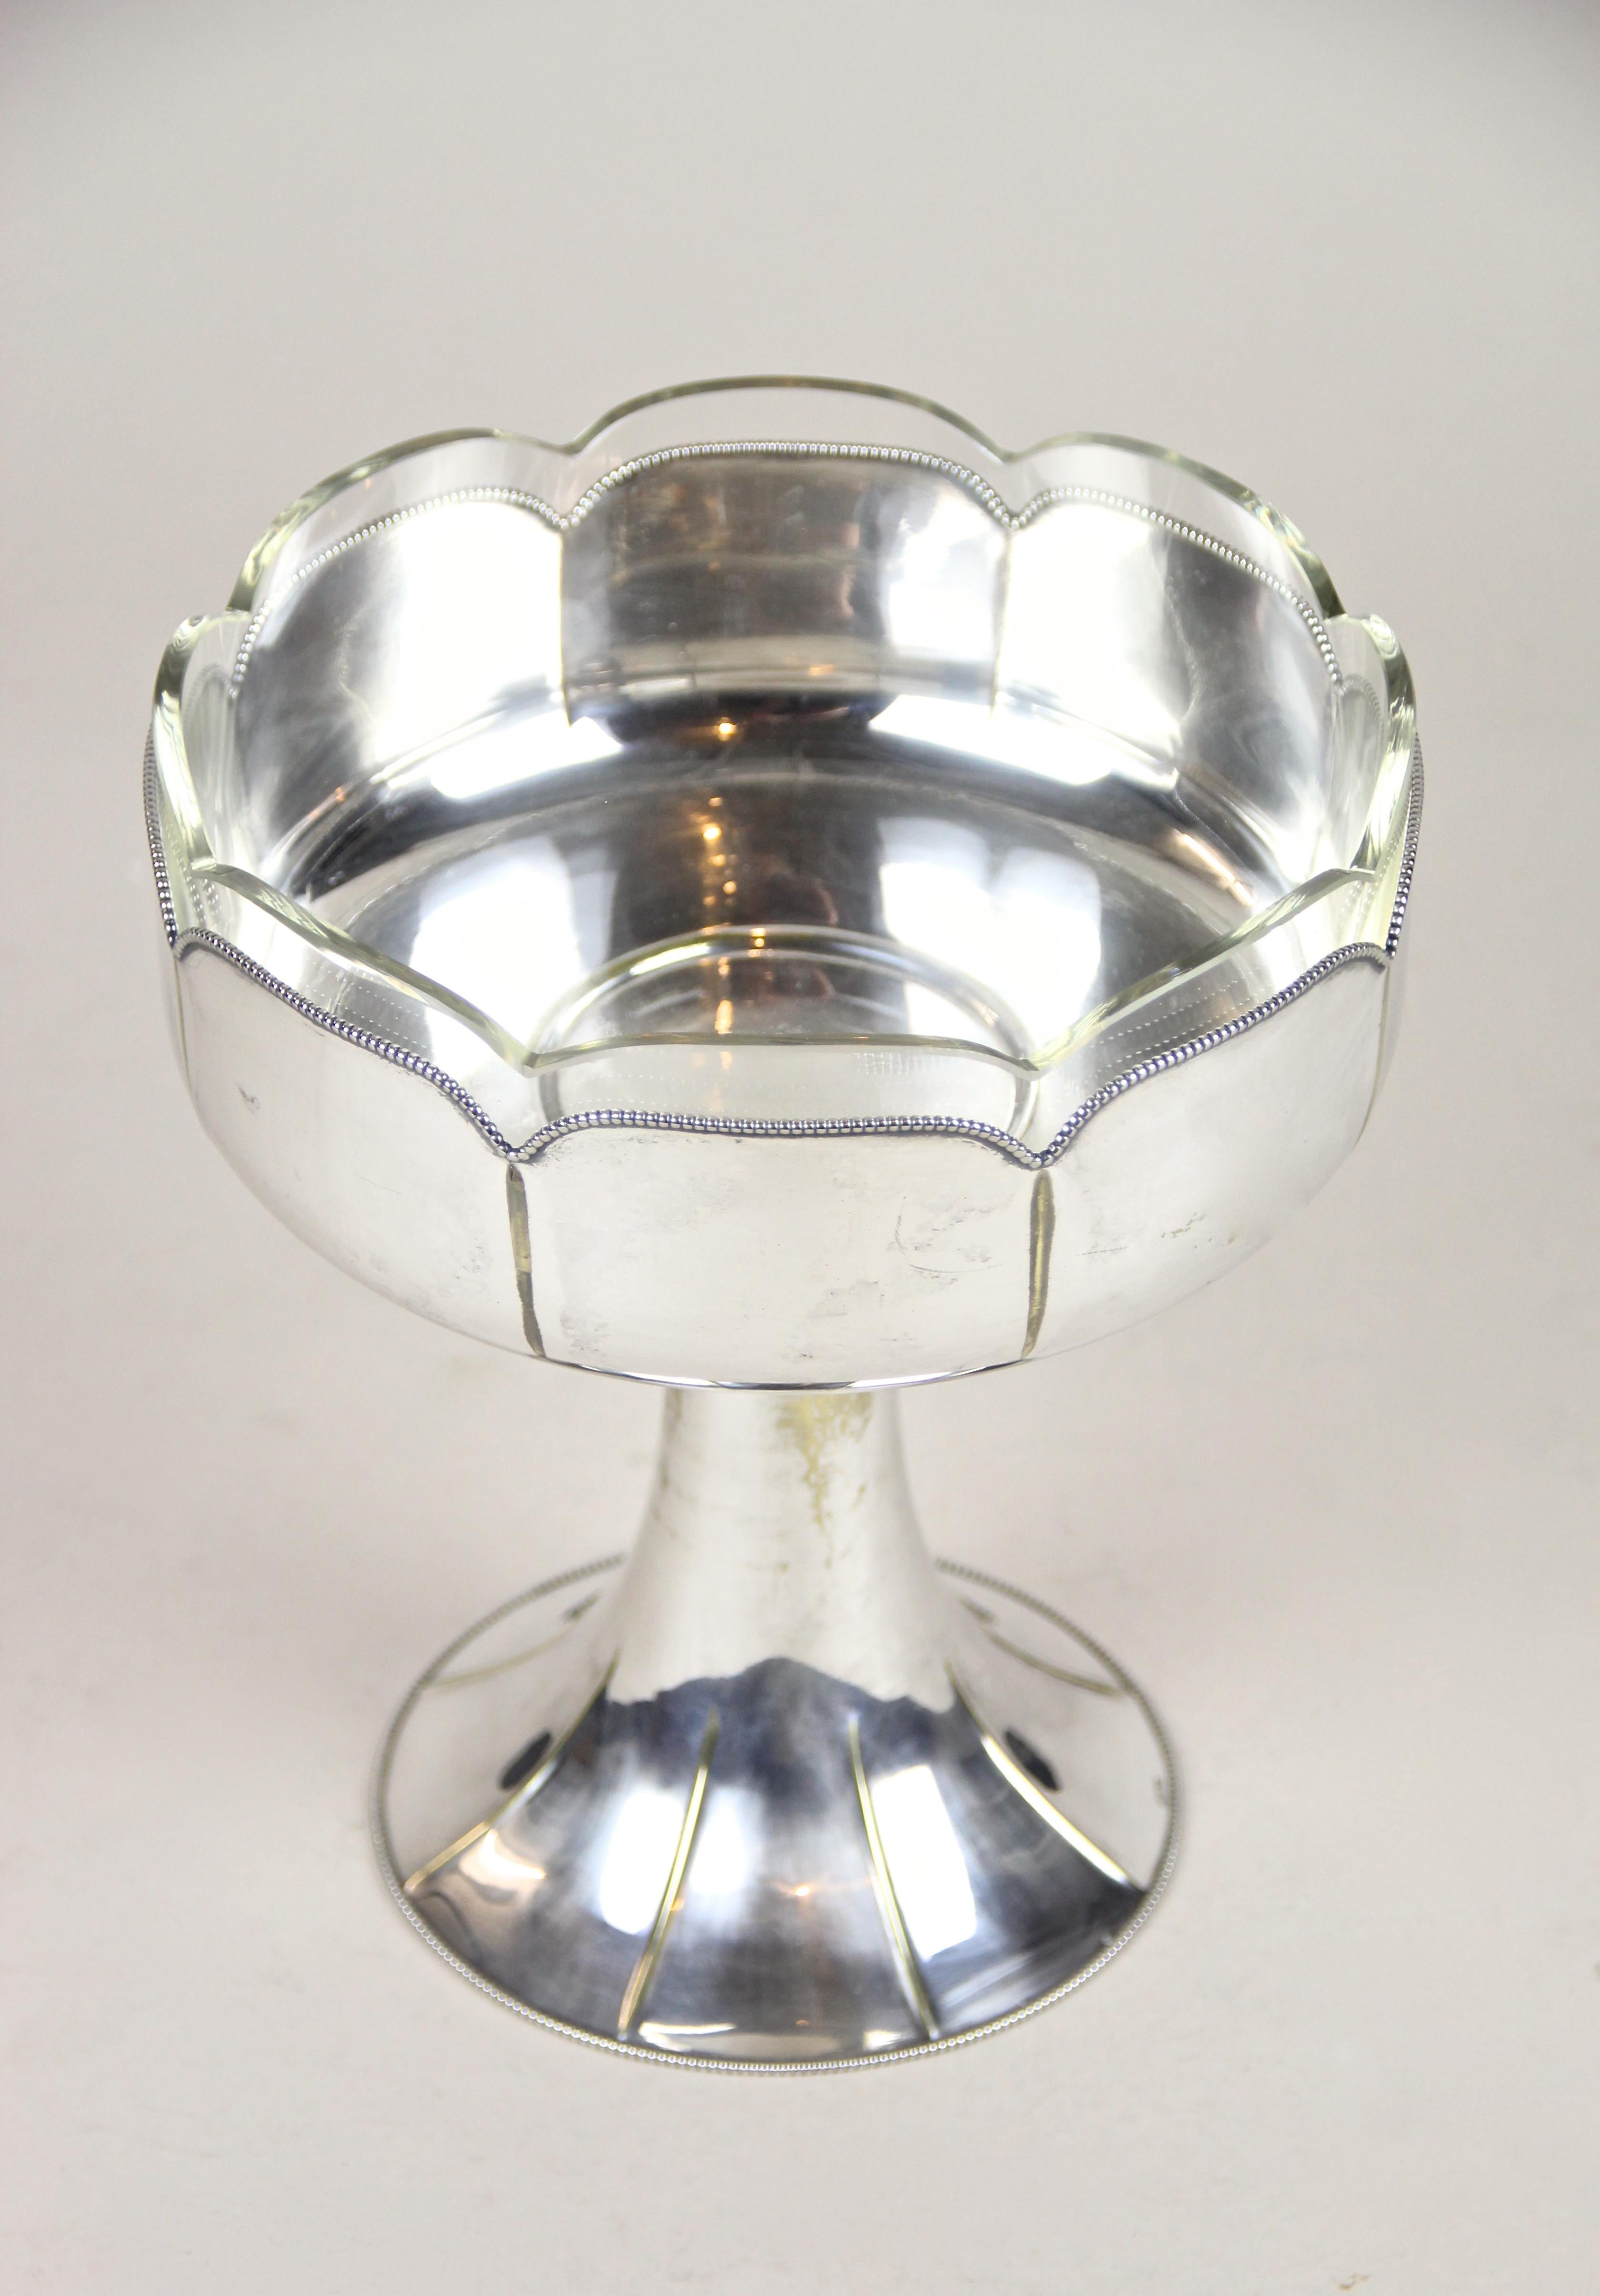 Charming silvered centerpiece with glass bowl from the famous German Company of WMF out of the Art Deco period circa 1920. A great designed centerpiece made of silvered brass and showing typical age related abrasions. Enthroned on the lovely shaped